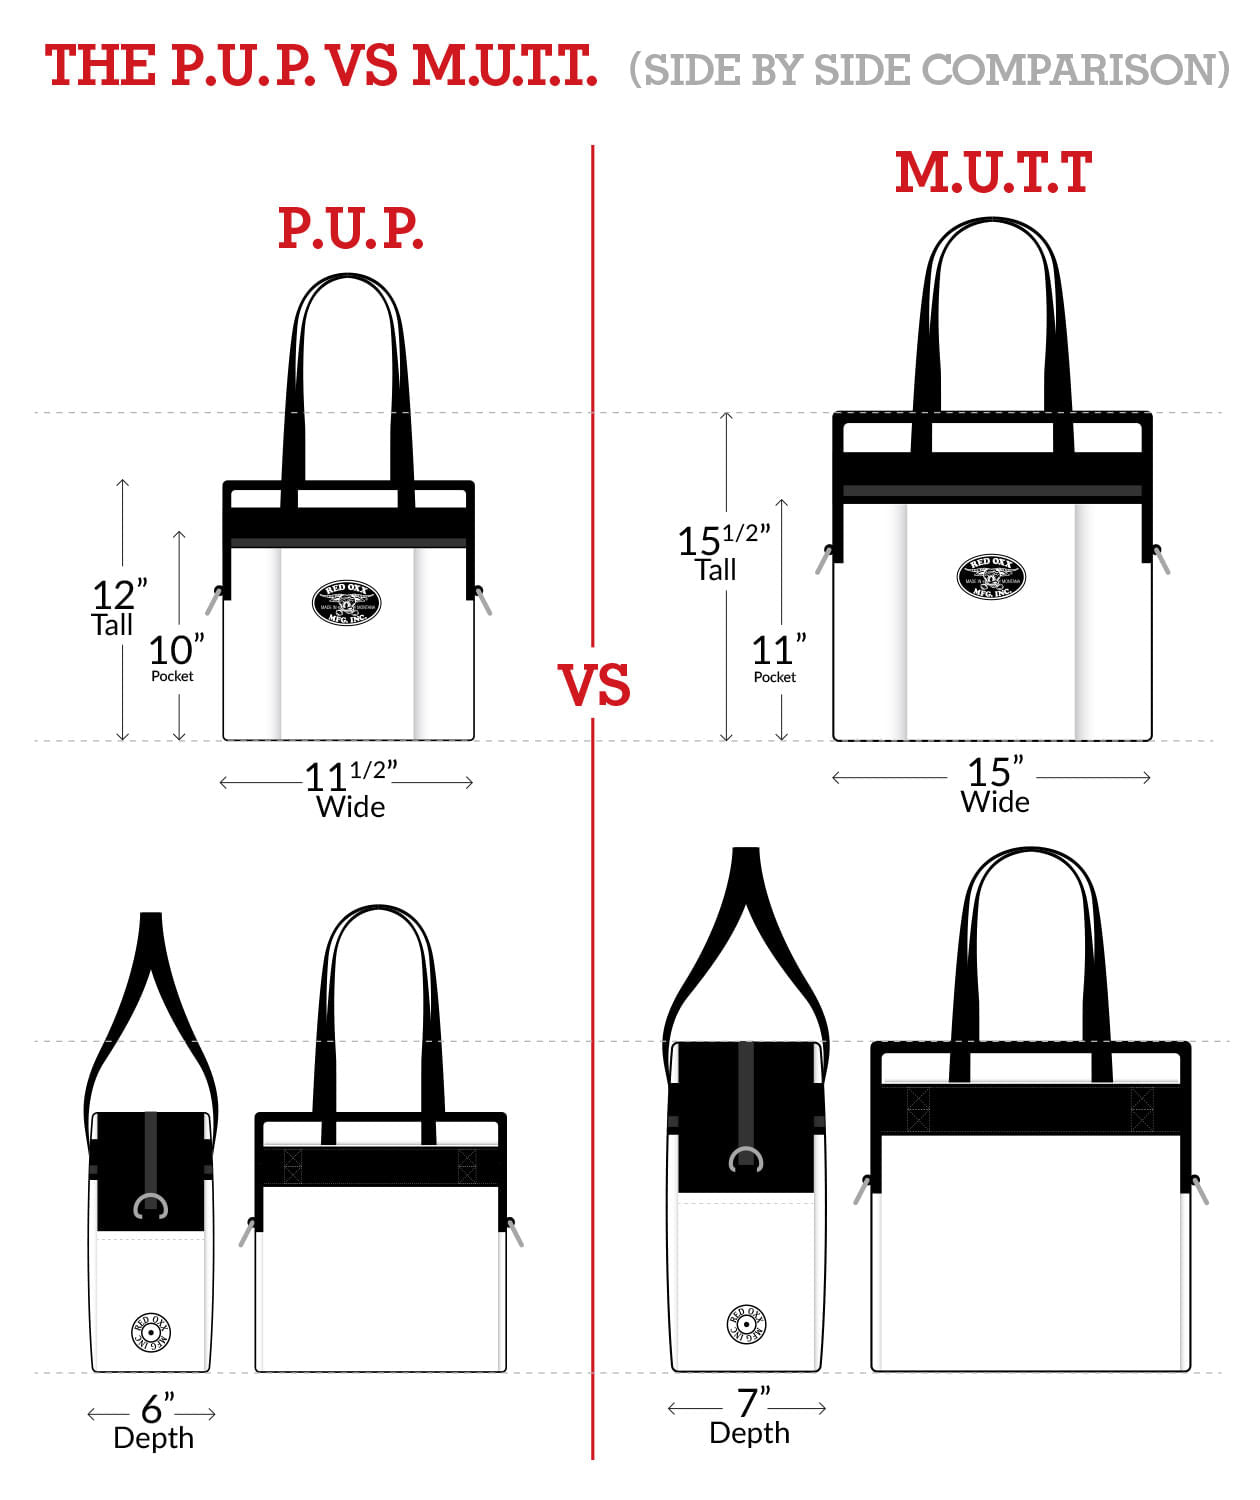 Comparison chart for PUPP and MUTT